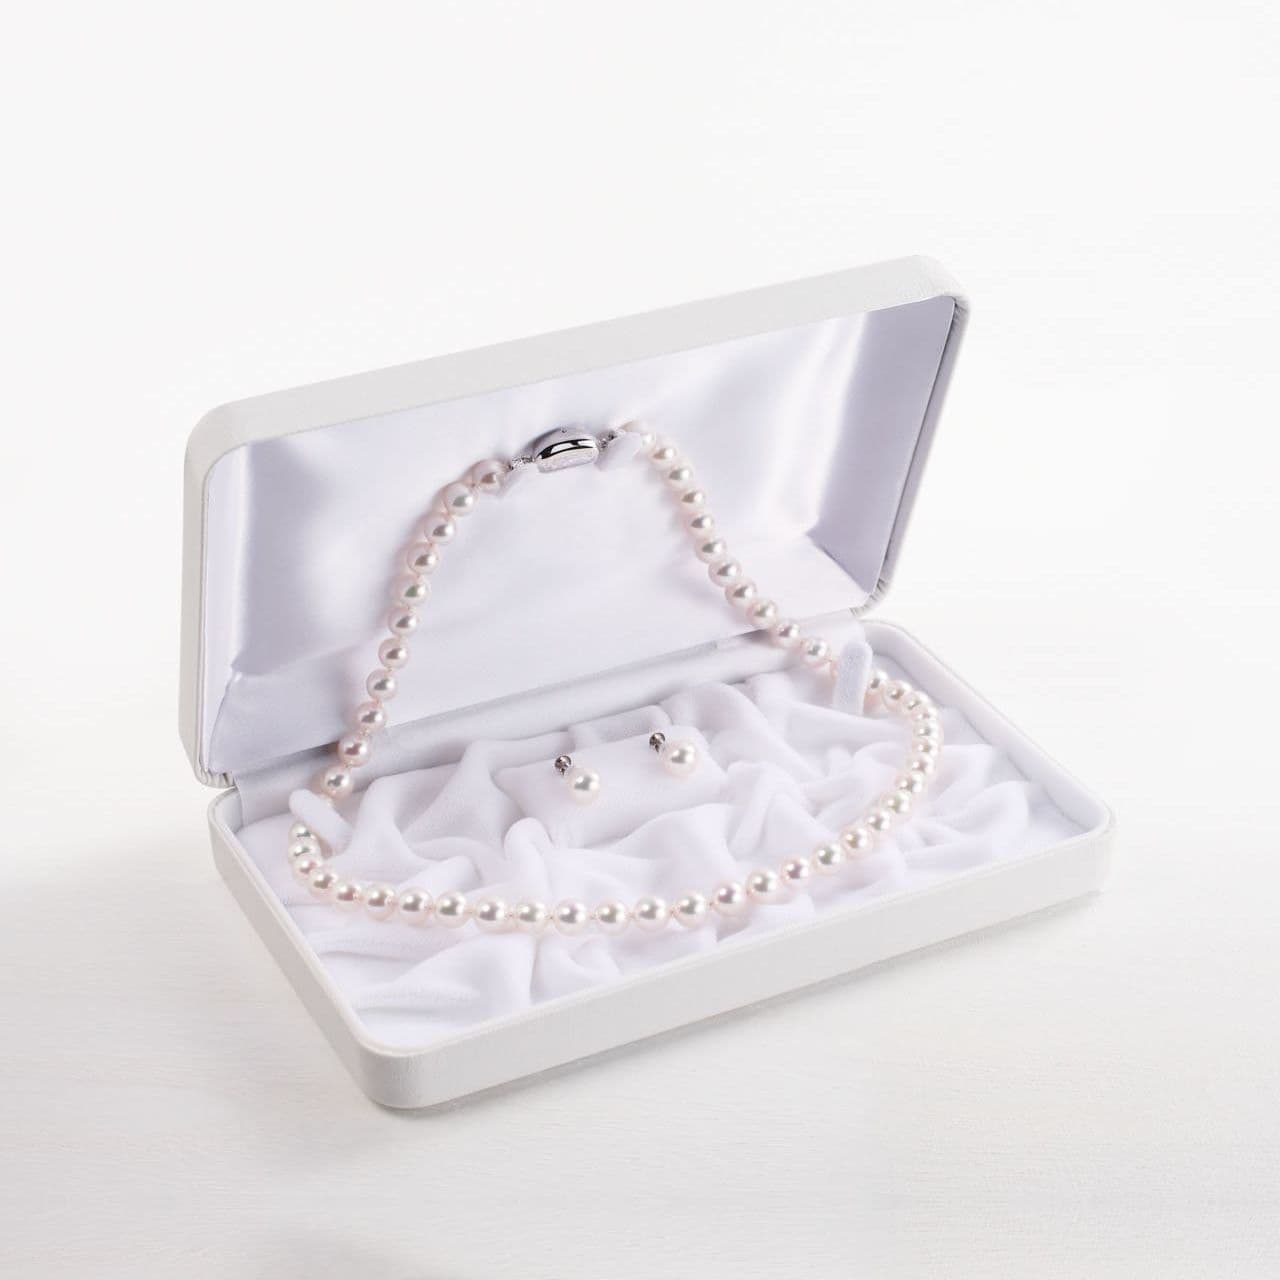 Akoya pearl necklace & pearl earrings set【L】/アコヤ真珠ネックレス＆イヤリングセット Mサイズ-4